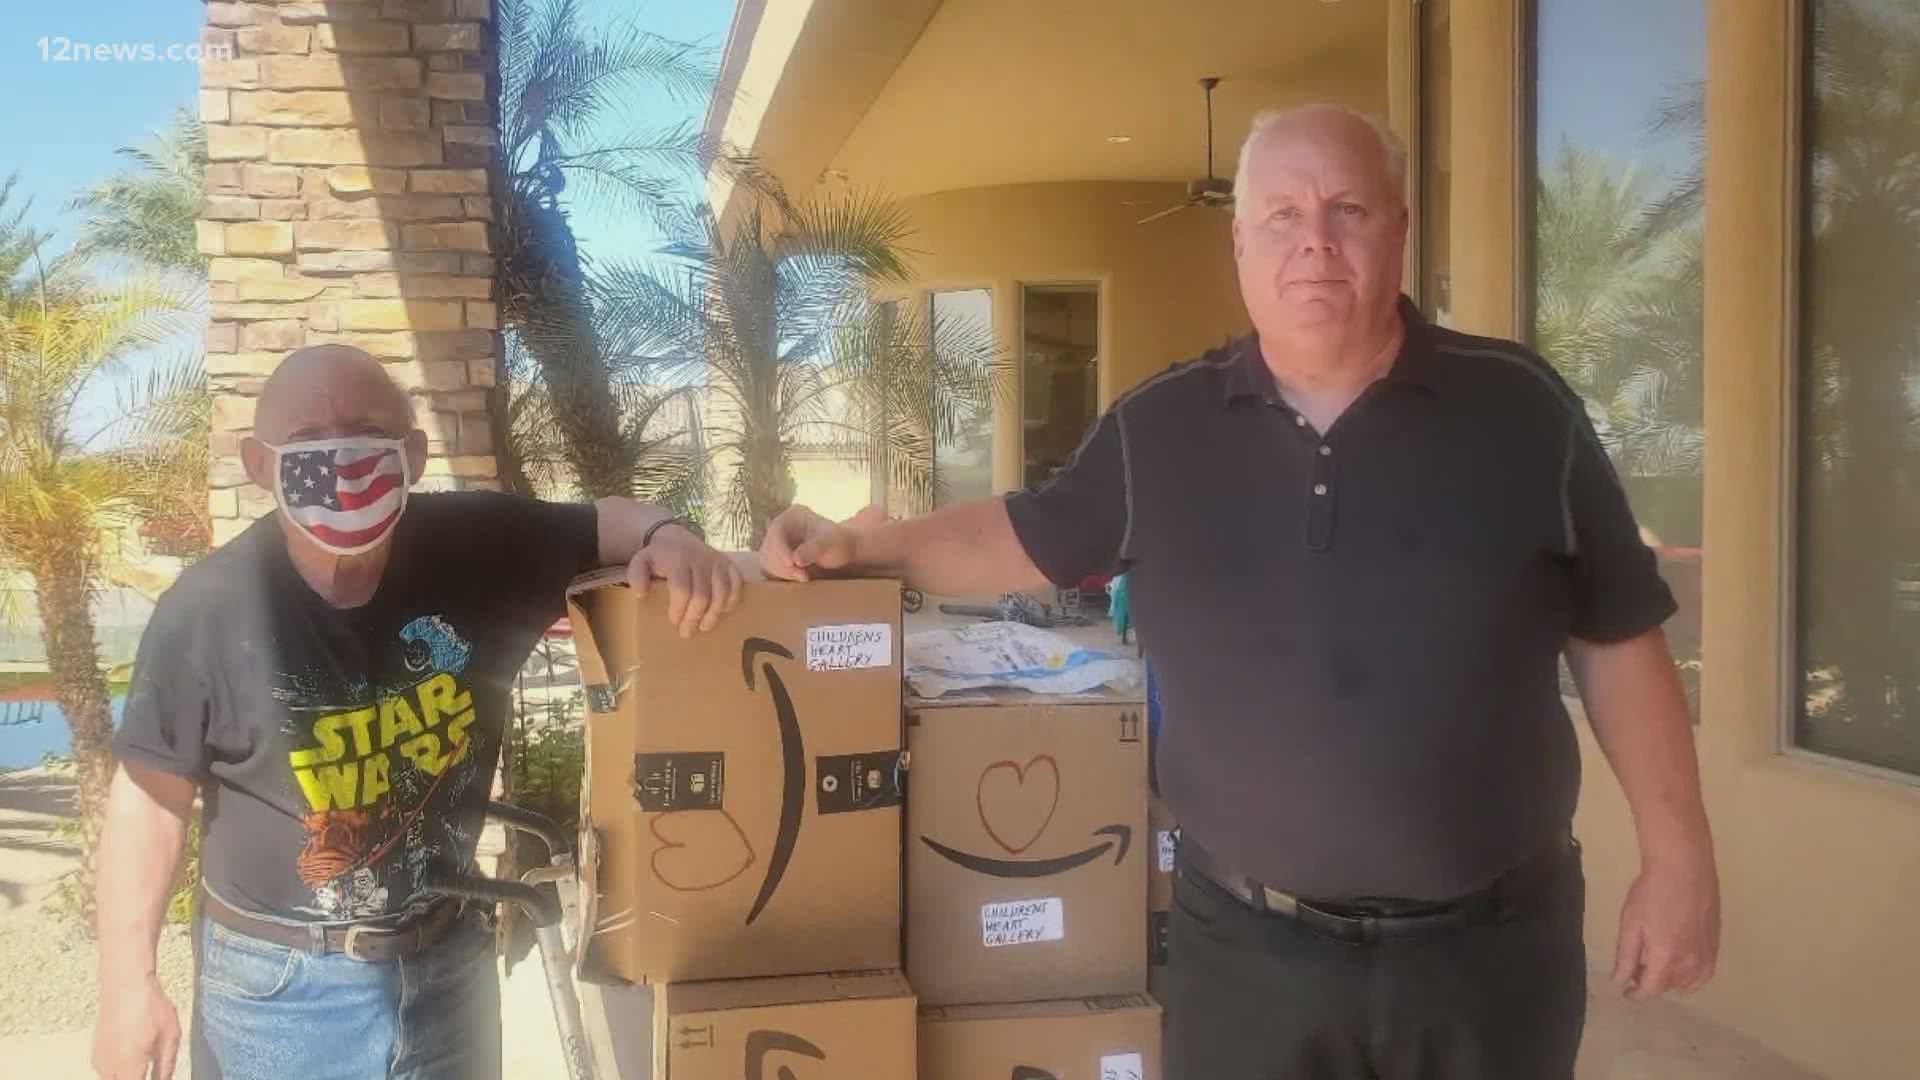 A Scottsdale man who read about kids in Arizona's foster care system during quarantine is making a difference. He donated $800 worth of toys to the kids.